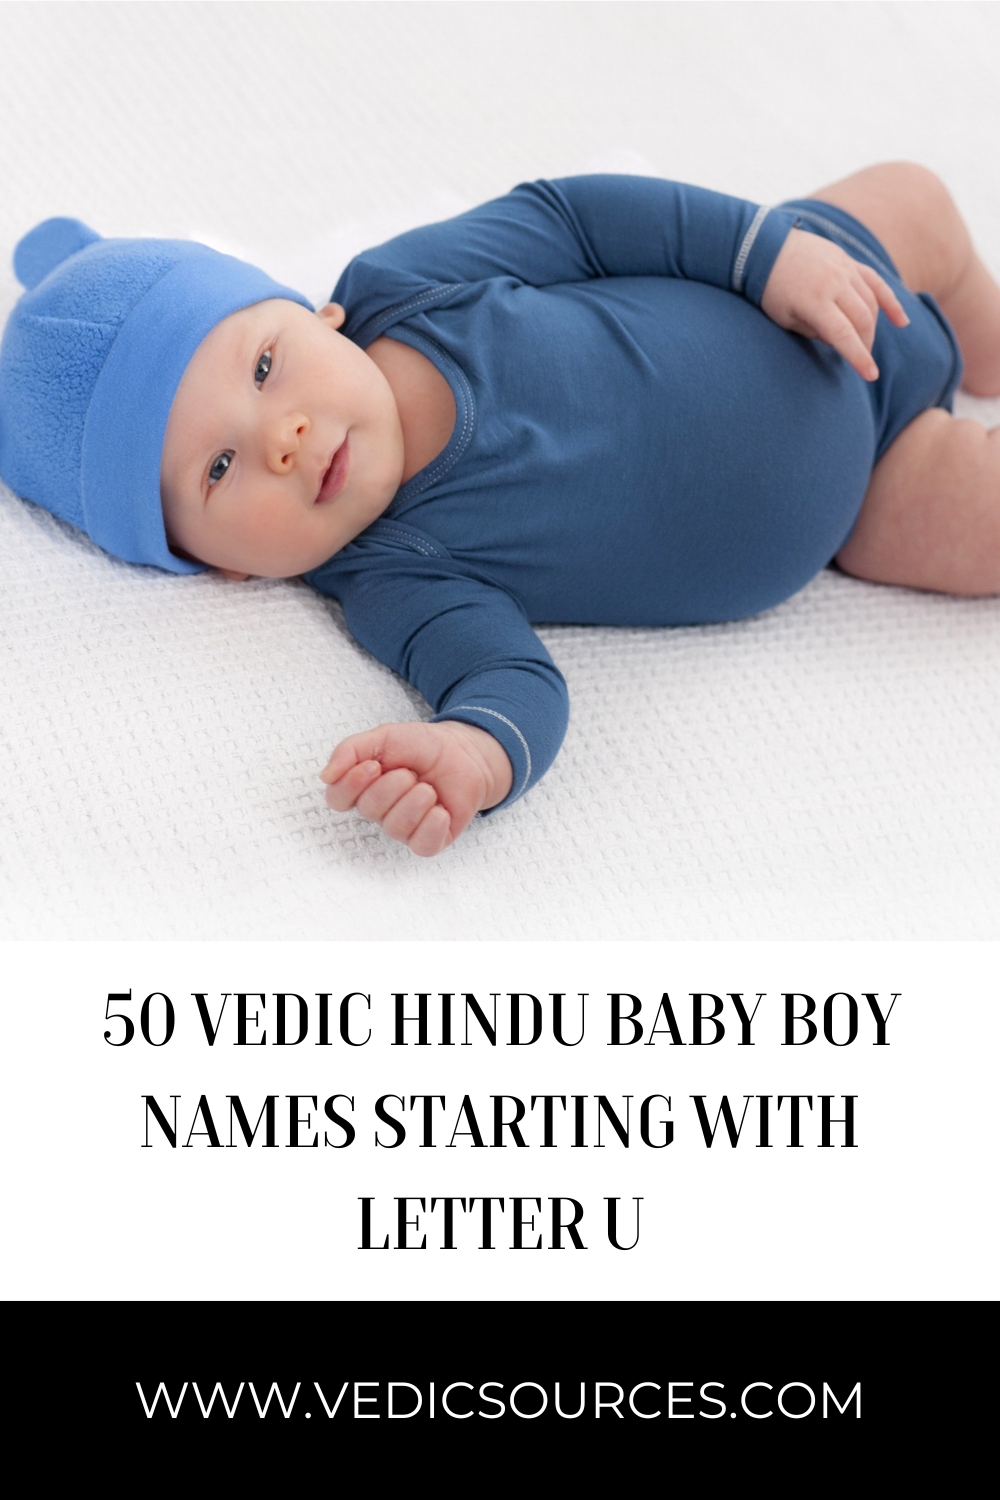 50 Vedic Hindu Baby Boy Names Starting with Letter U